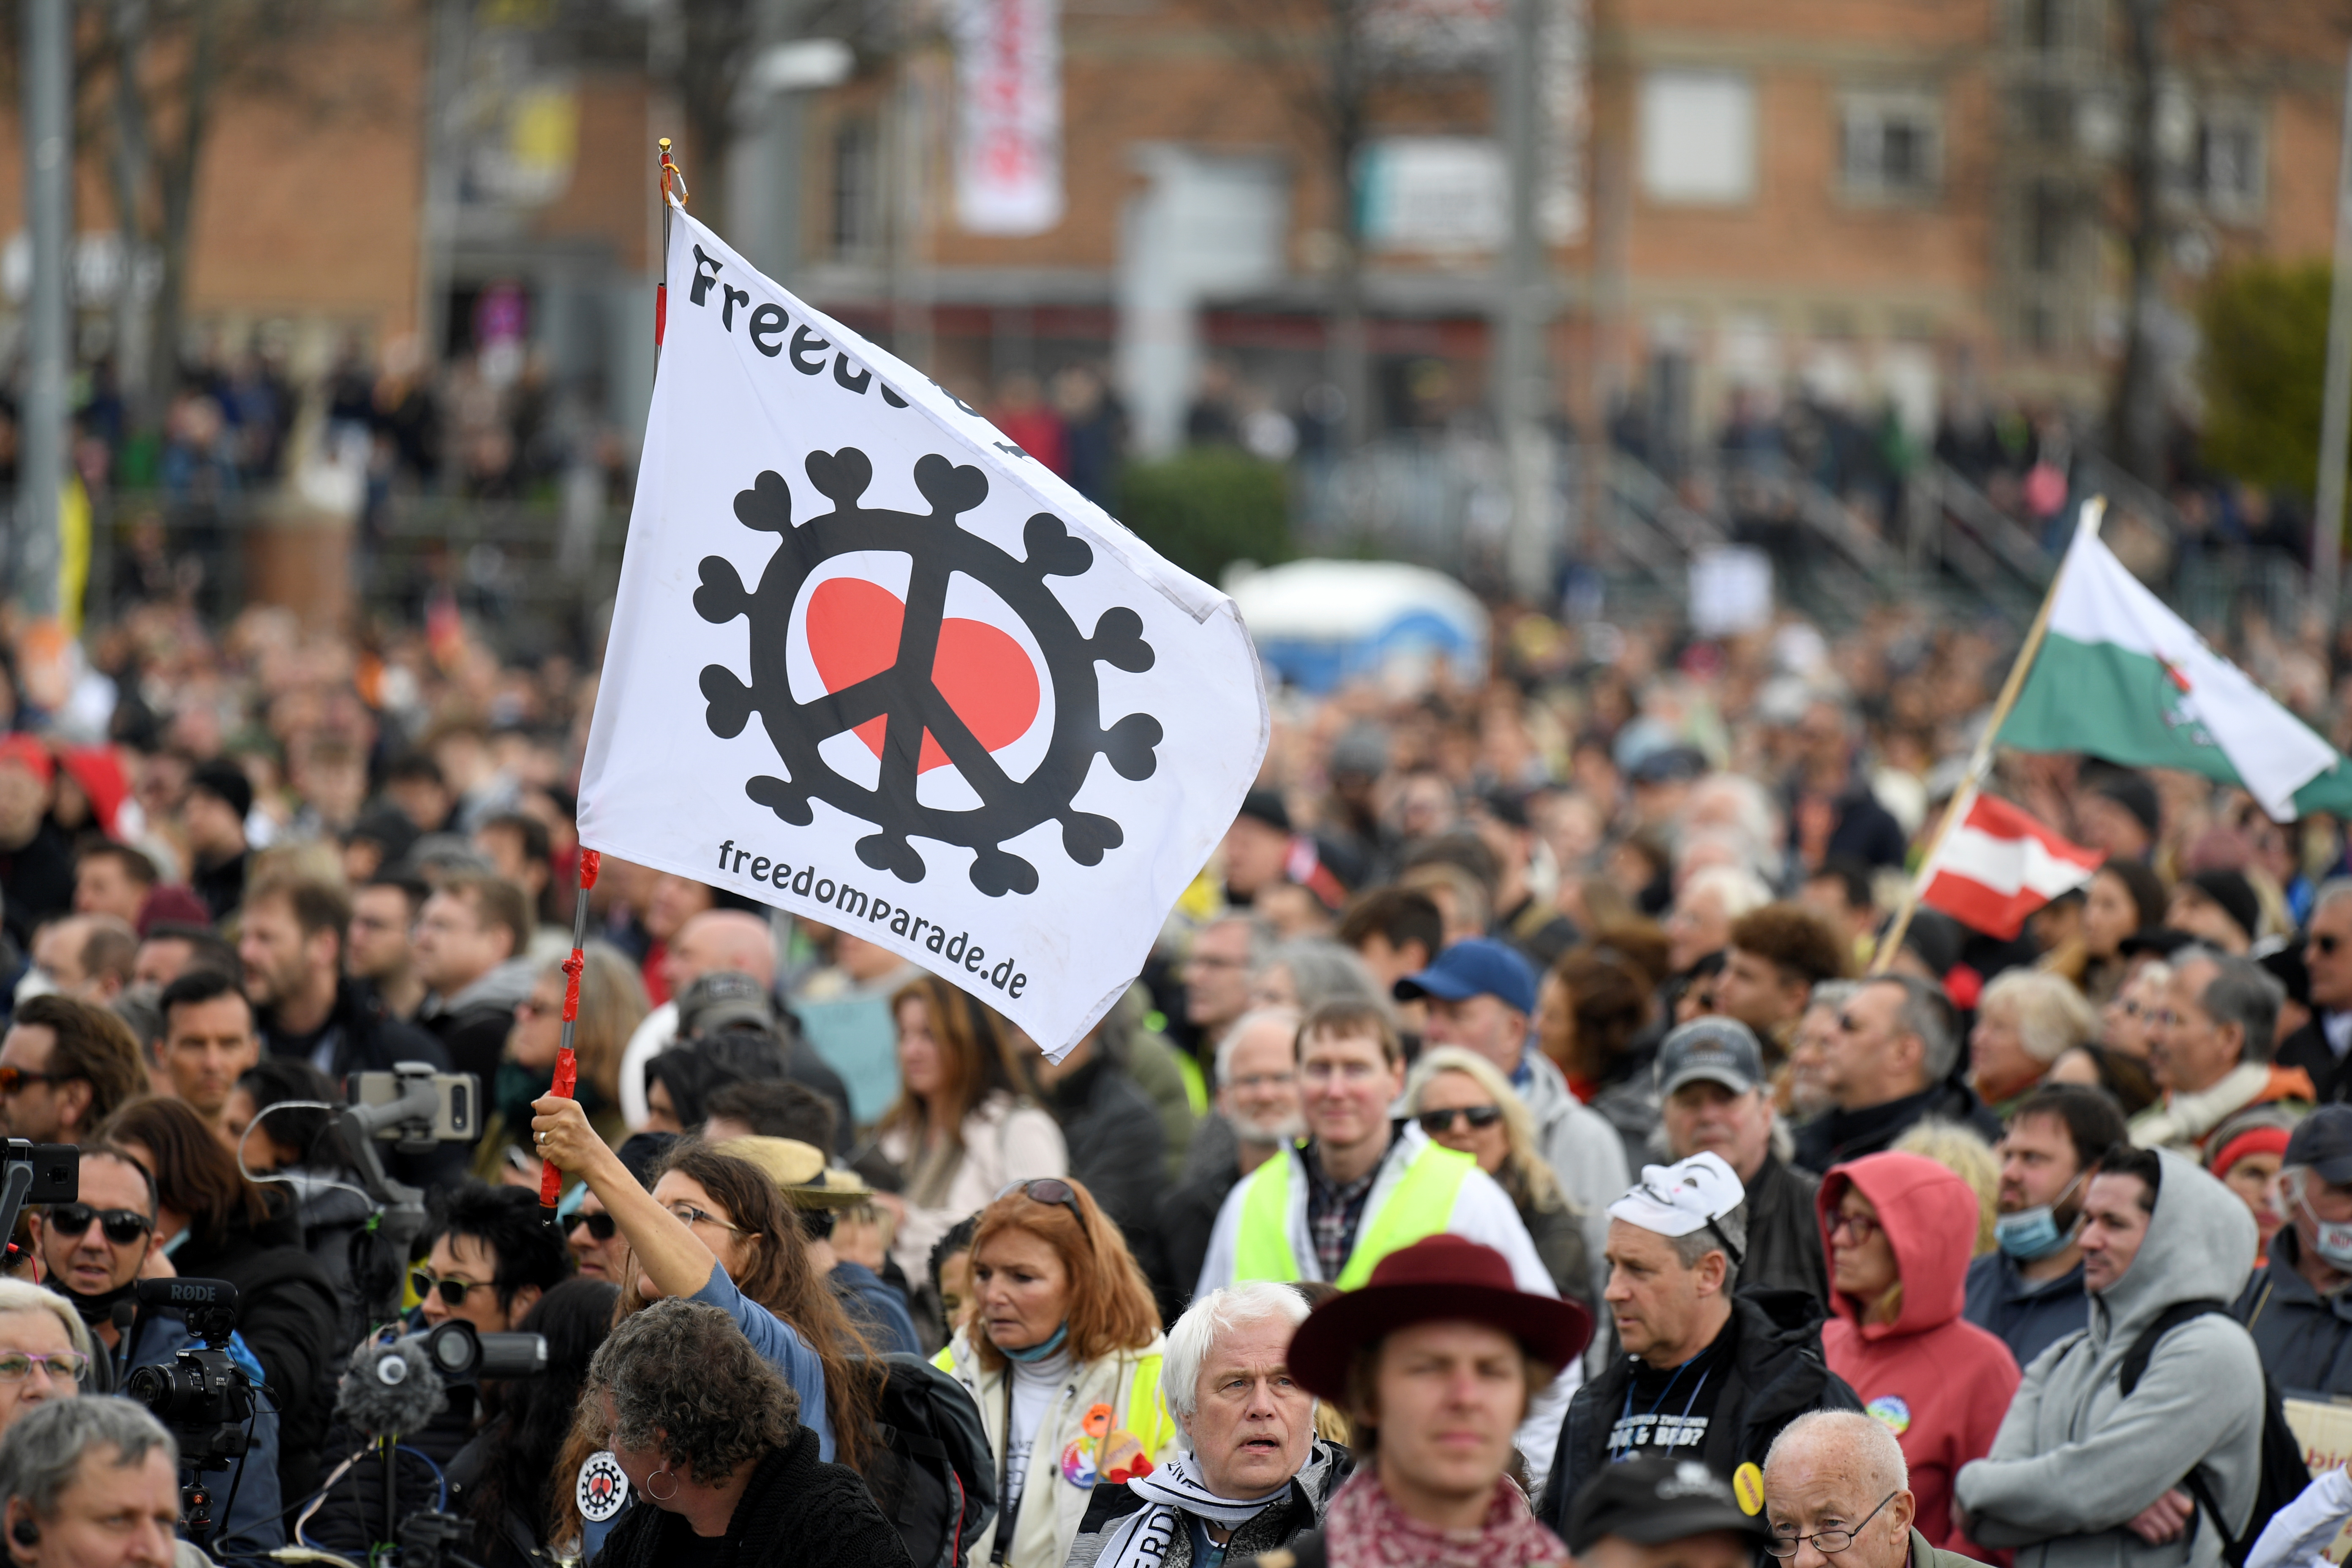 Demonstrators attend a protest against the government's coronavirus disease (COVID-19) restrictions in Stuttgart, Germany, April 3, 2021. REUTERS/Andreas Gebert